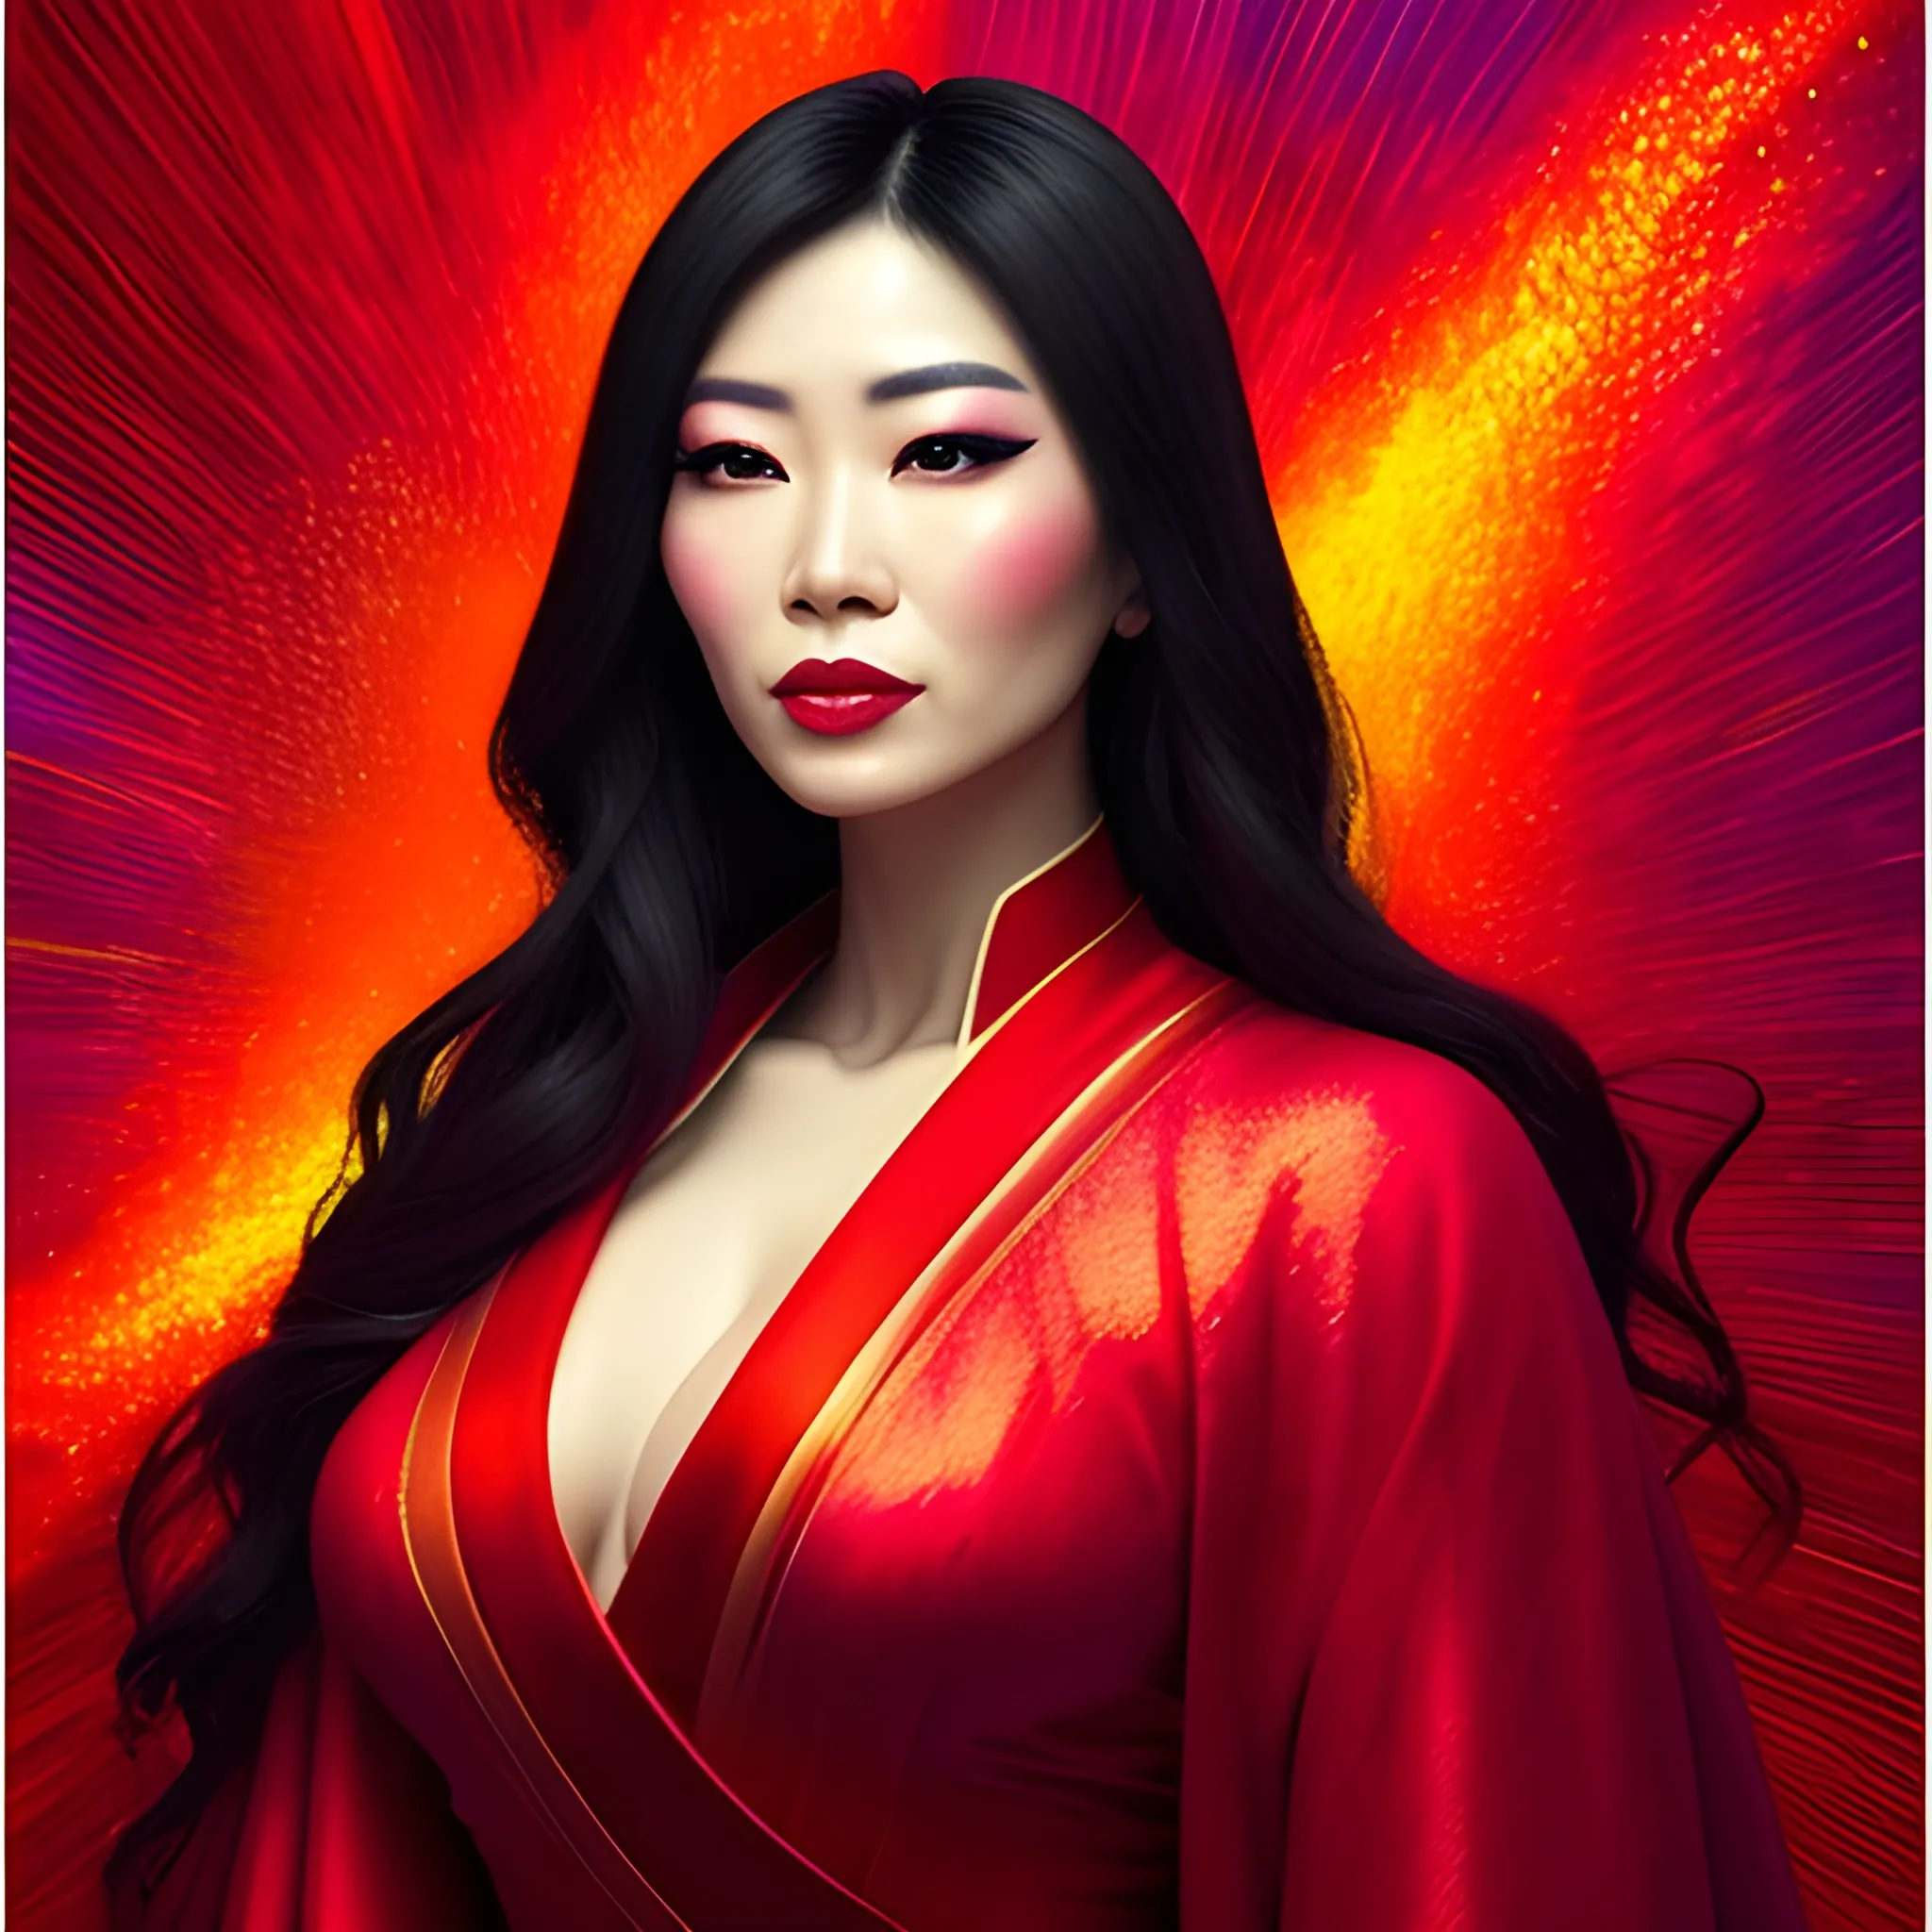 a asian girl, shrouded in a mystical glow, stands in the center of a red background that seems to pulsate and come to life around her. this portrait is a hymn to the color red in all its diversity and depth. - background aesthetics: the background is not just red, it shimmers in all shades, from rich burgundy to bright scarlet, creating the illusion of movement and life. it's not just a color, it's a whole world of feelings and emotions